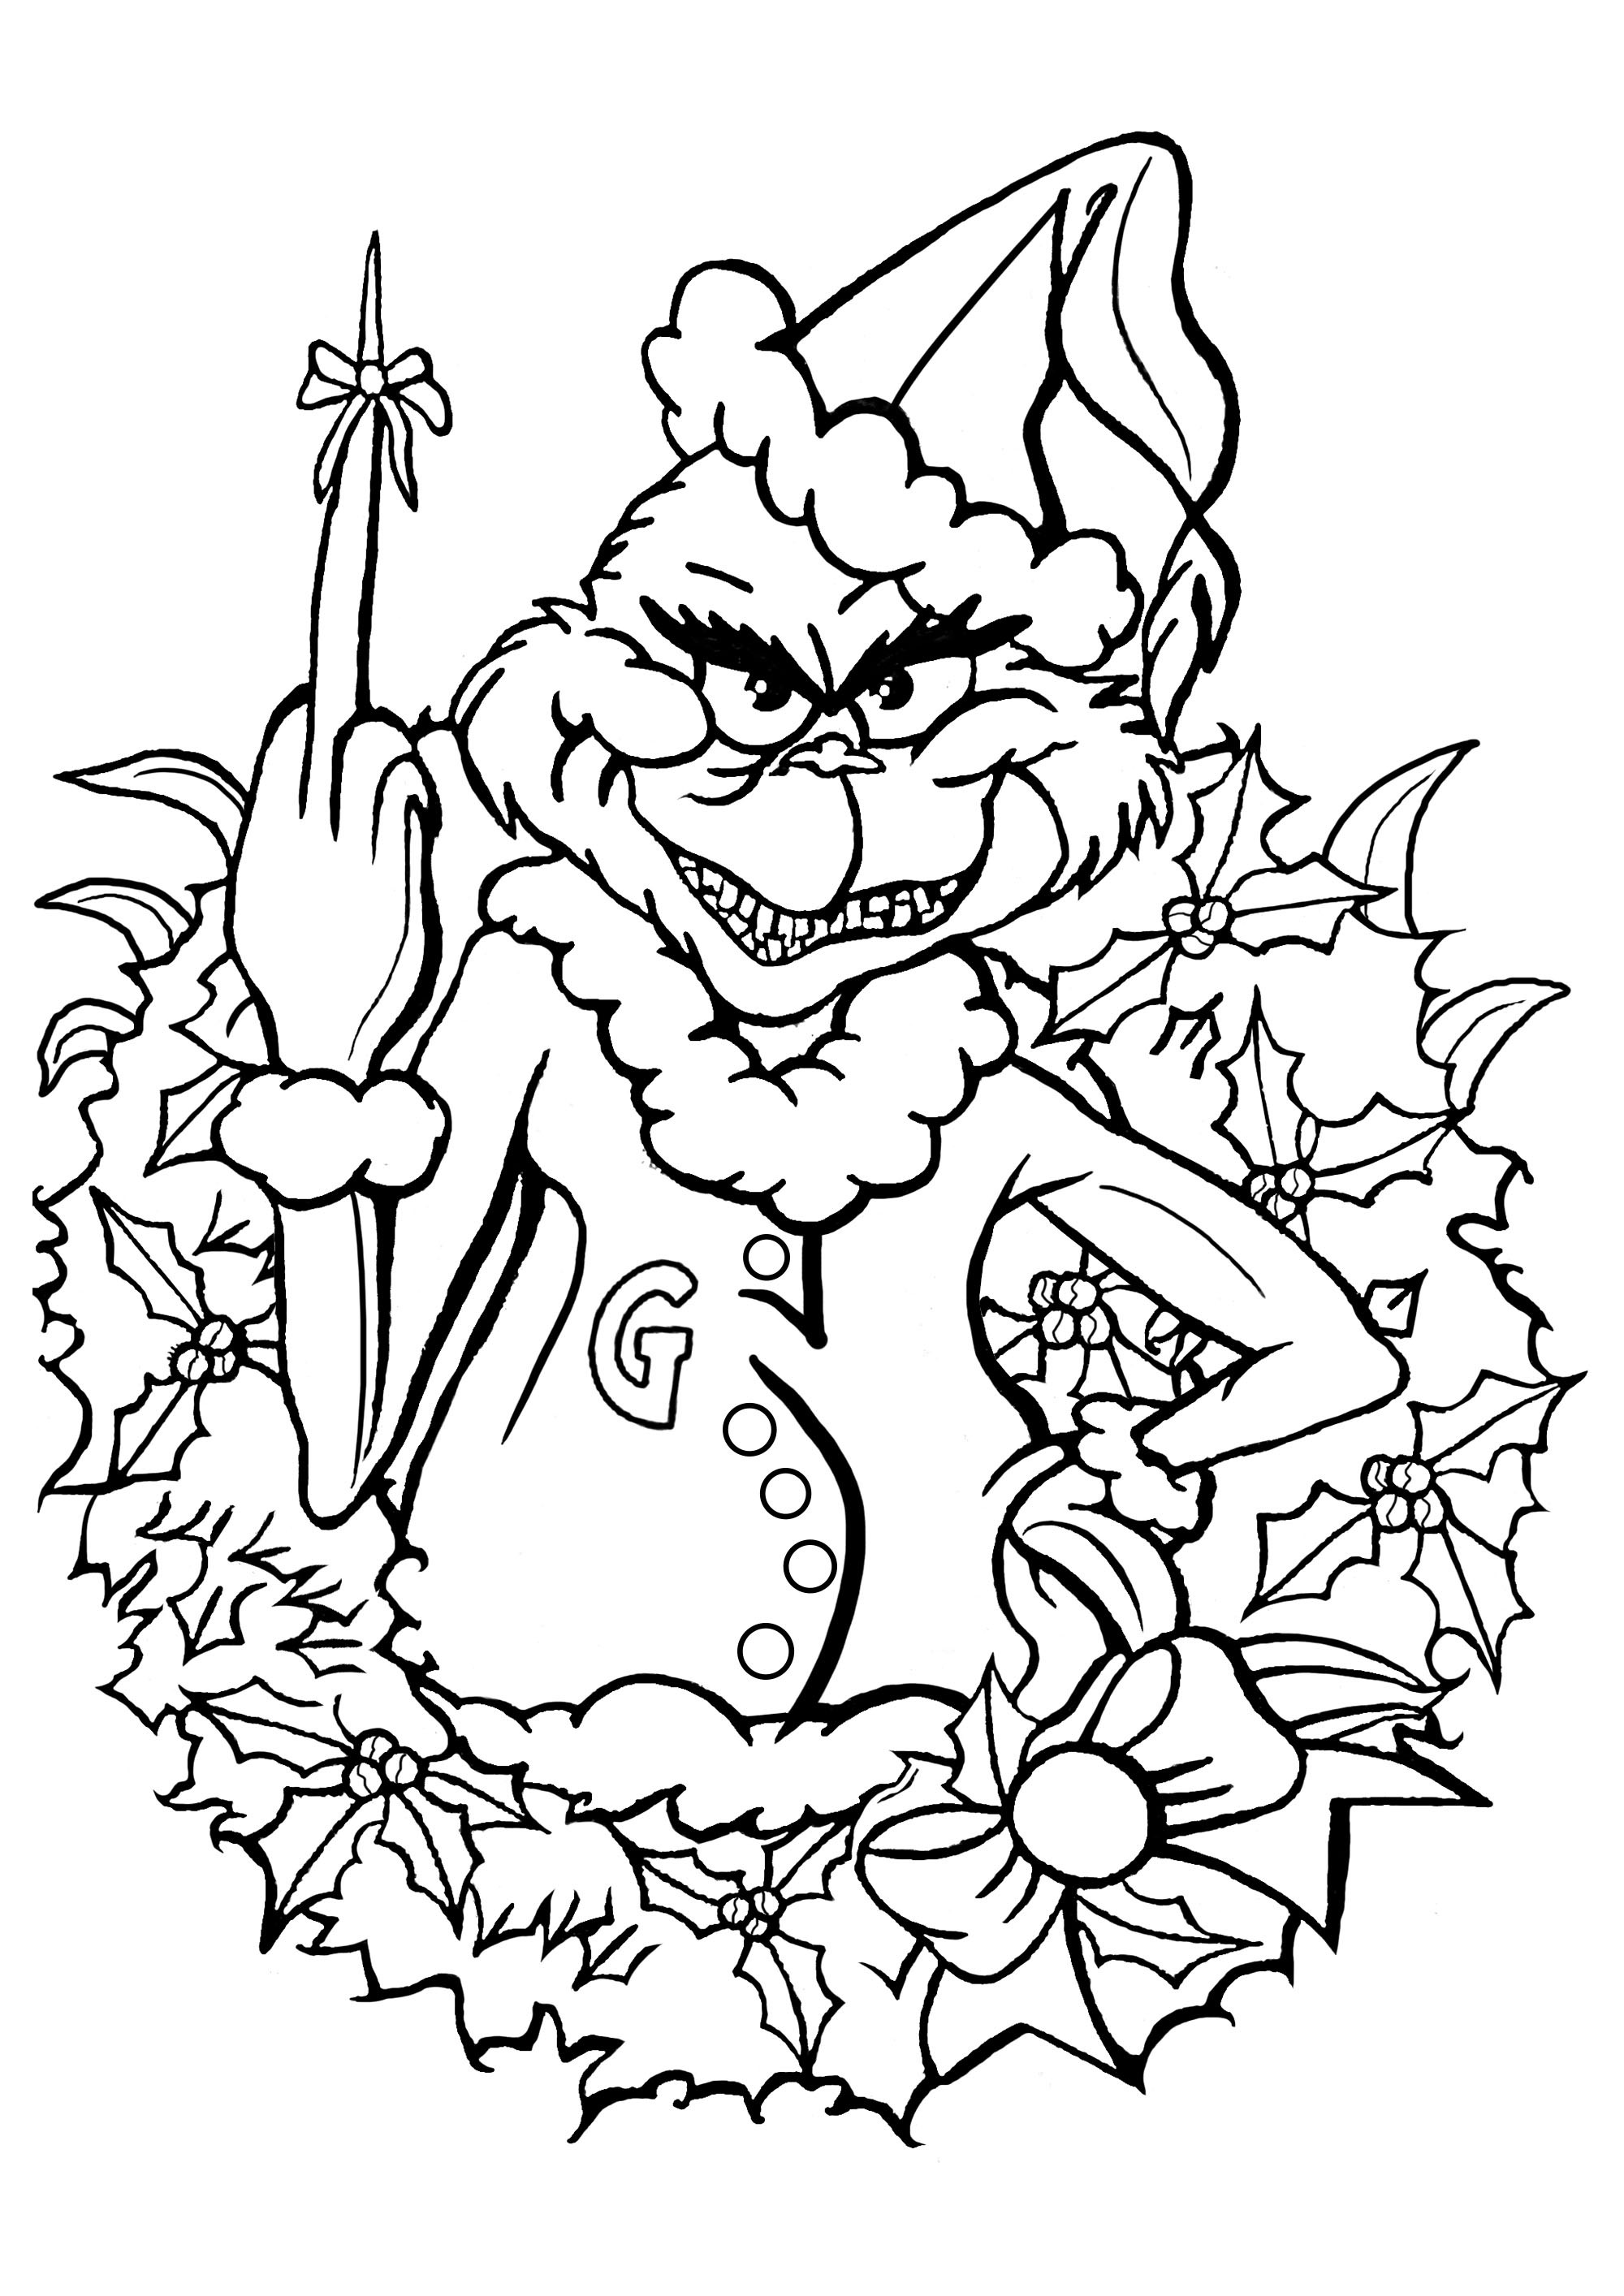 Grinch Ausmalbilder
 The Grinch Christmas Adult Coloring Pages